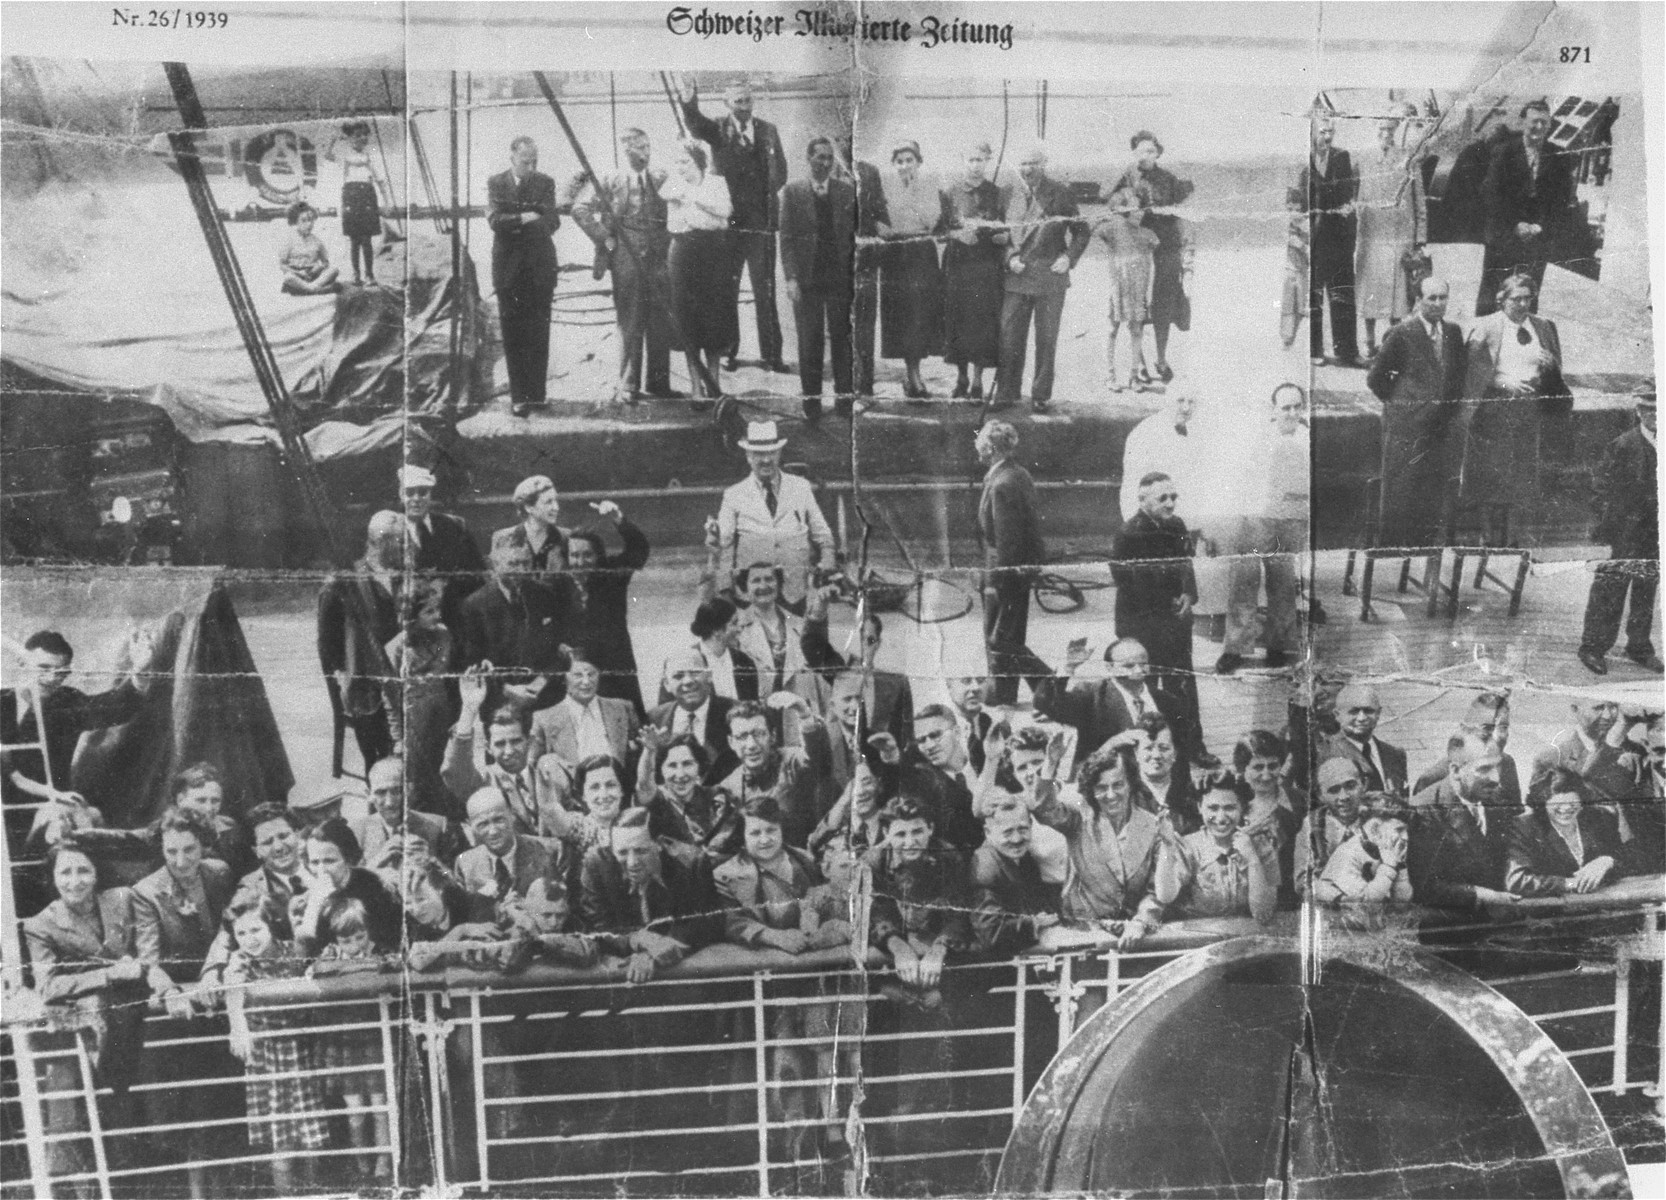 Passengers crowd the deck of the MS St. Louis.  

Among those pictured is Ernst Weil (with glasses) waving from the deck.  Standing in the back on a raised section, the fifth and sixth people from the left are mother and daughter, Elly and Renate Reutlinger.